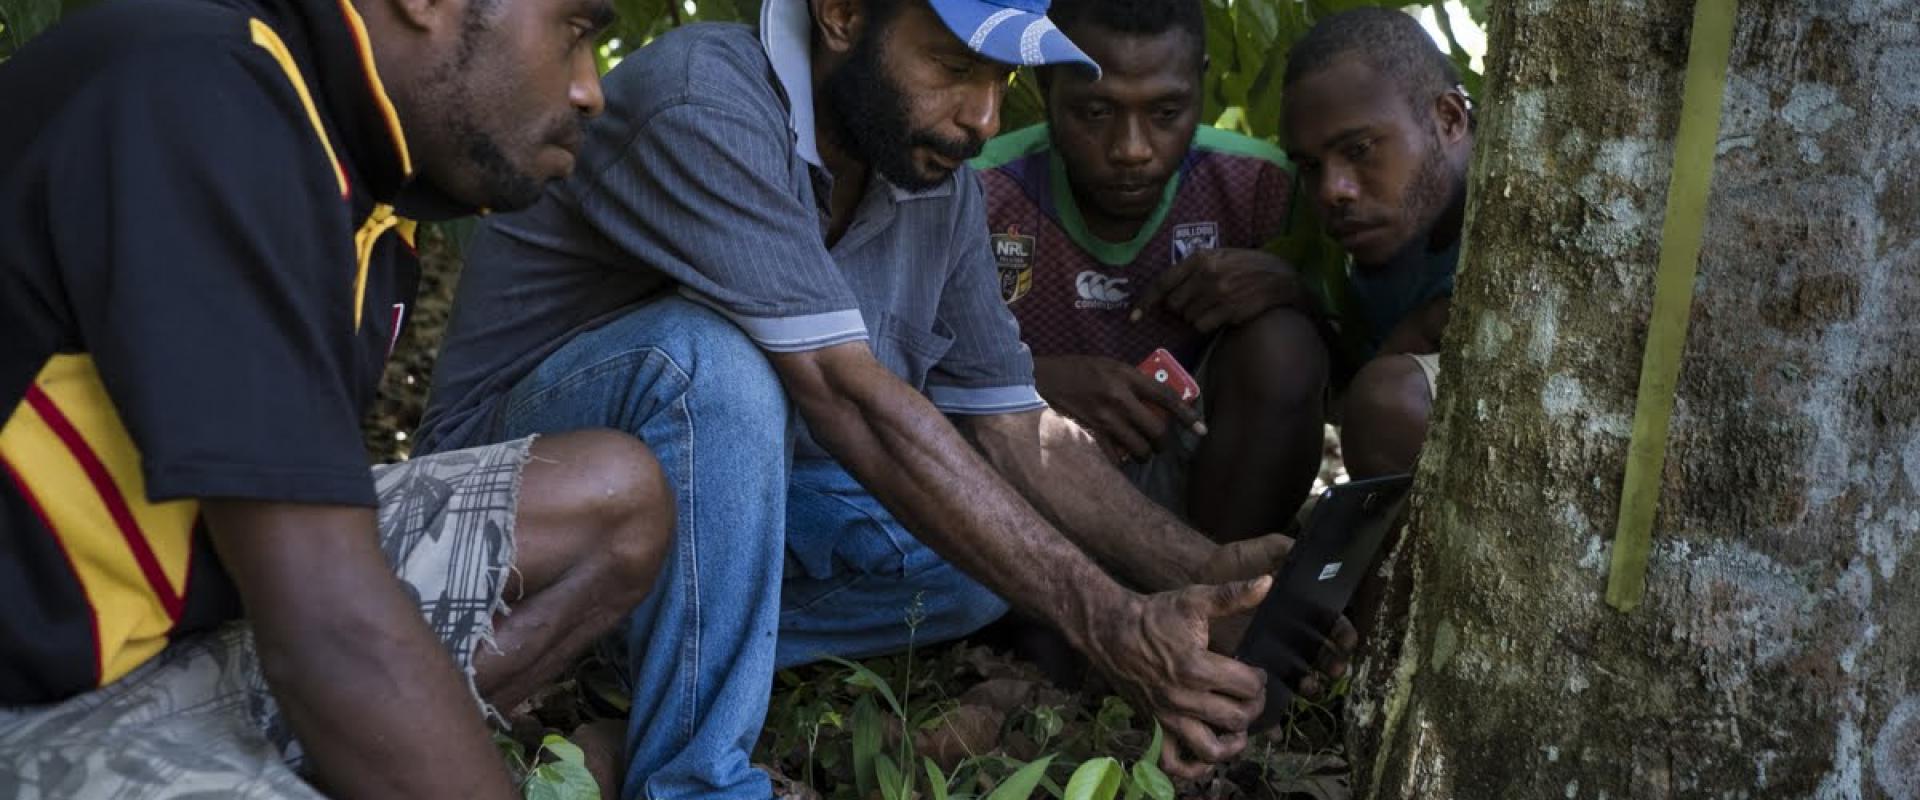 Ano Yonda holds a tablet with Mark Aik and Francis Kui inspect holes in the base of a canarium tree that have been left by a boring (left) and Juponse Bokosou (3rd from left)  underneath canarium trees located at the Kerevat NARI research station outside Rabaul in East New Britain province of Papua New Guinea. Earlier in the year a large group of NARI staff participated in the commcare training delivered by AgImpact as part of an ACIAR short research assignment.